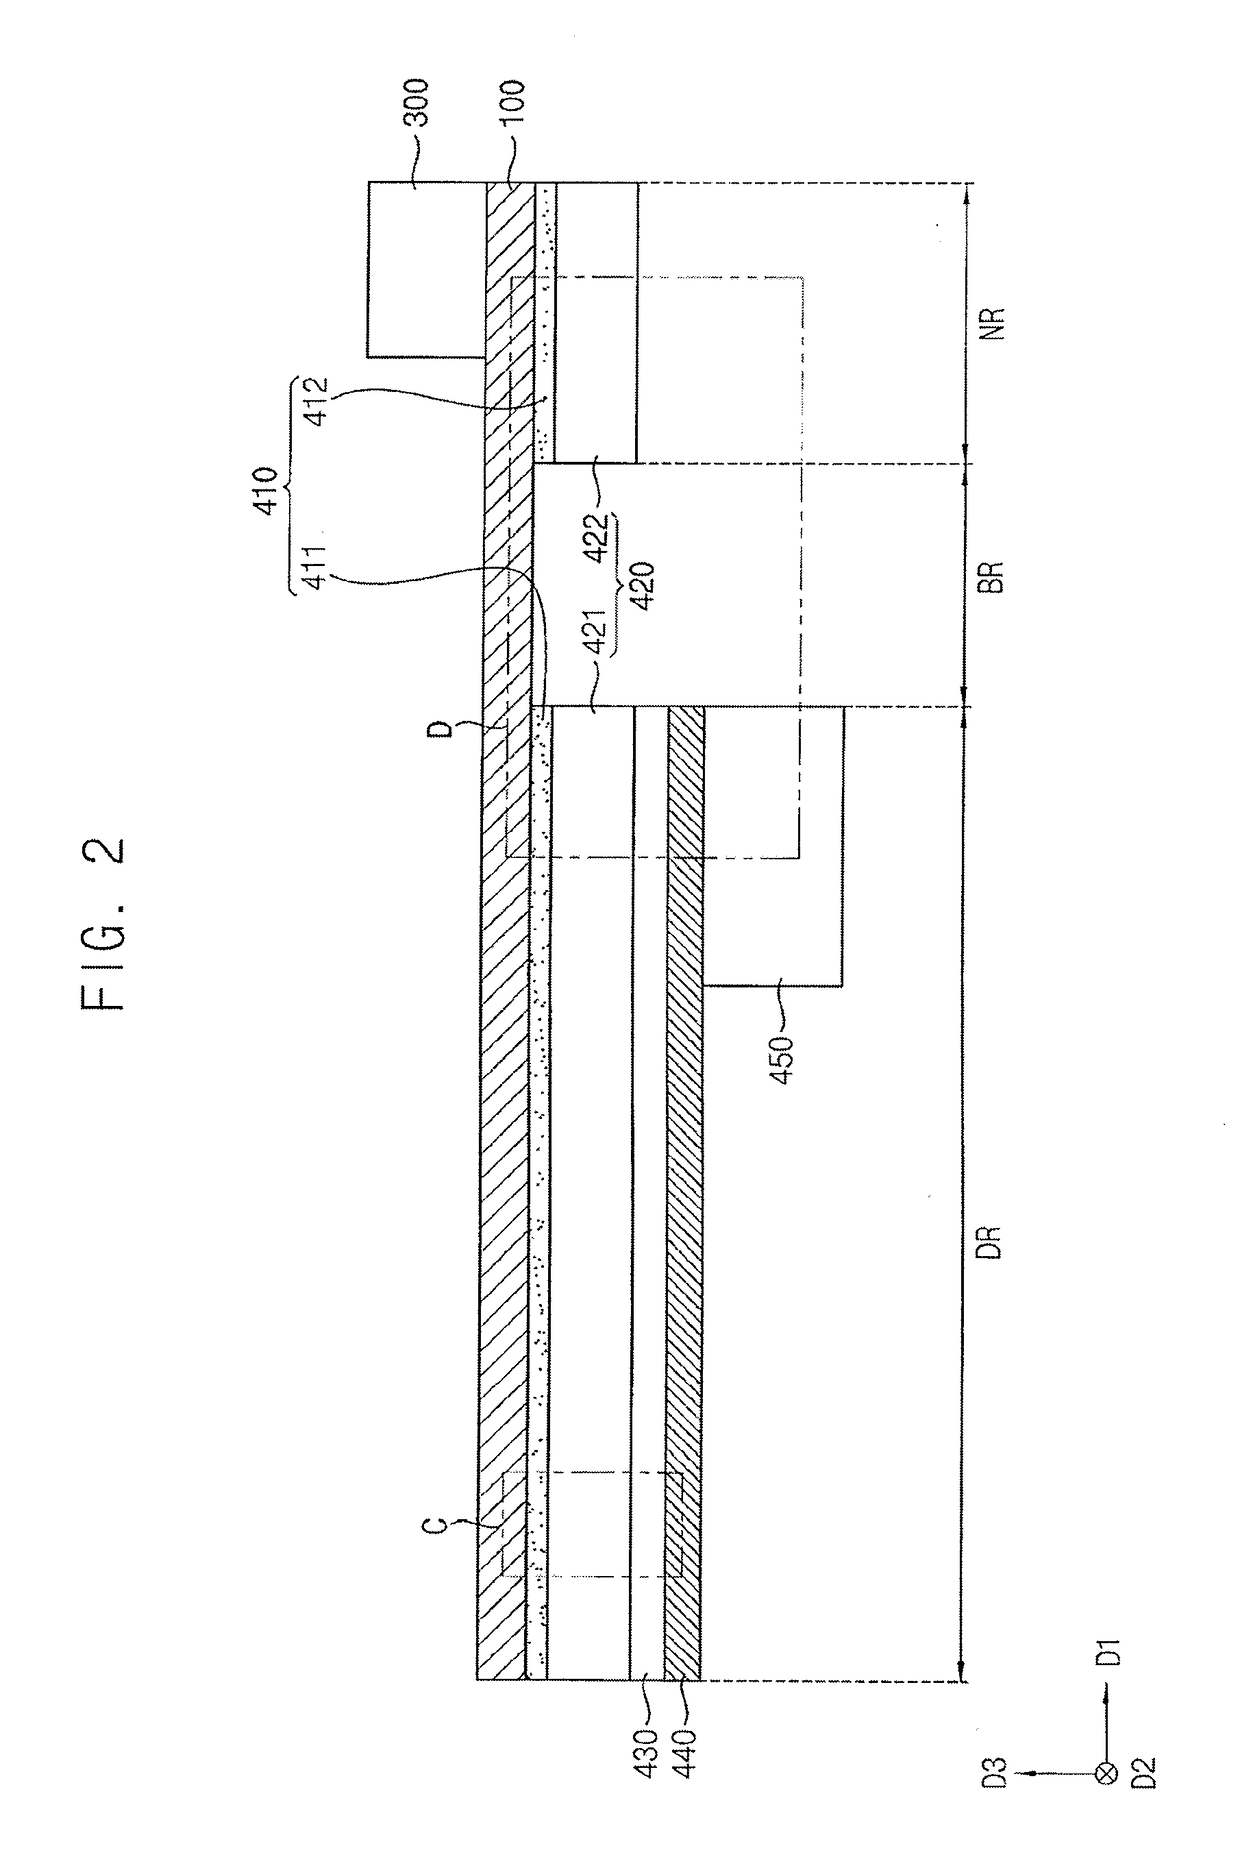 Display device having notched connection wiring